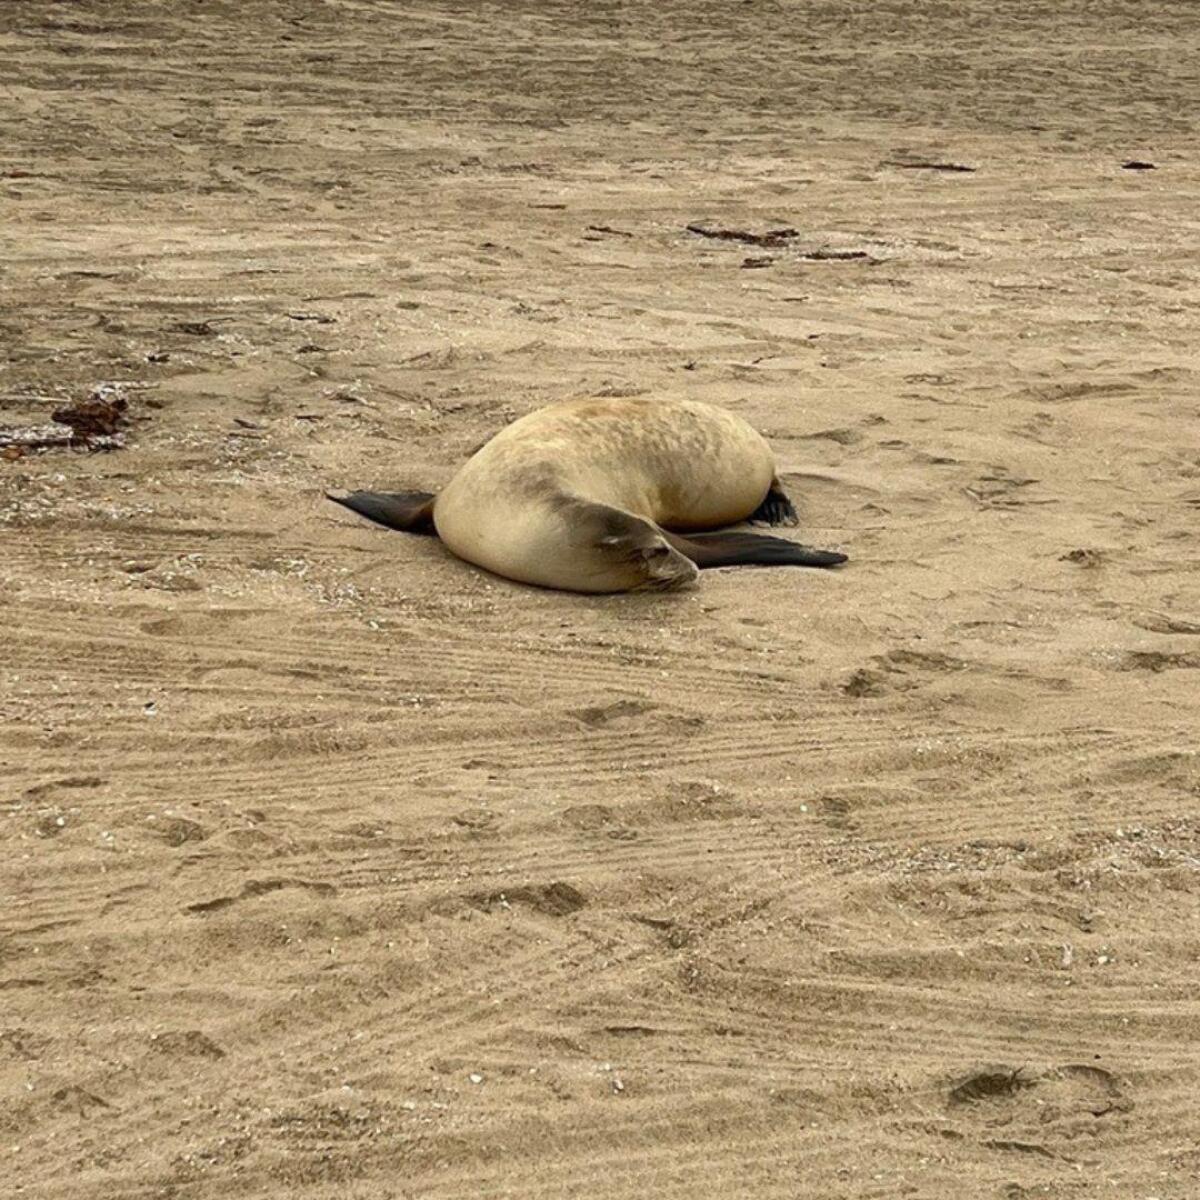 A sea lion poisoned by domoic acid, a byproduct of algae blooms.